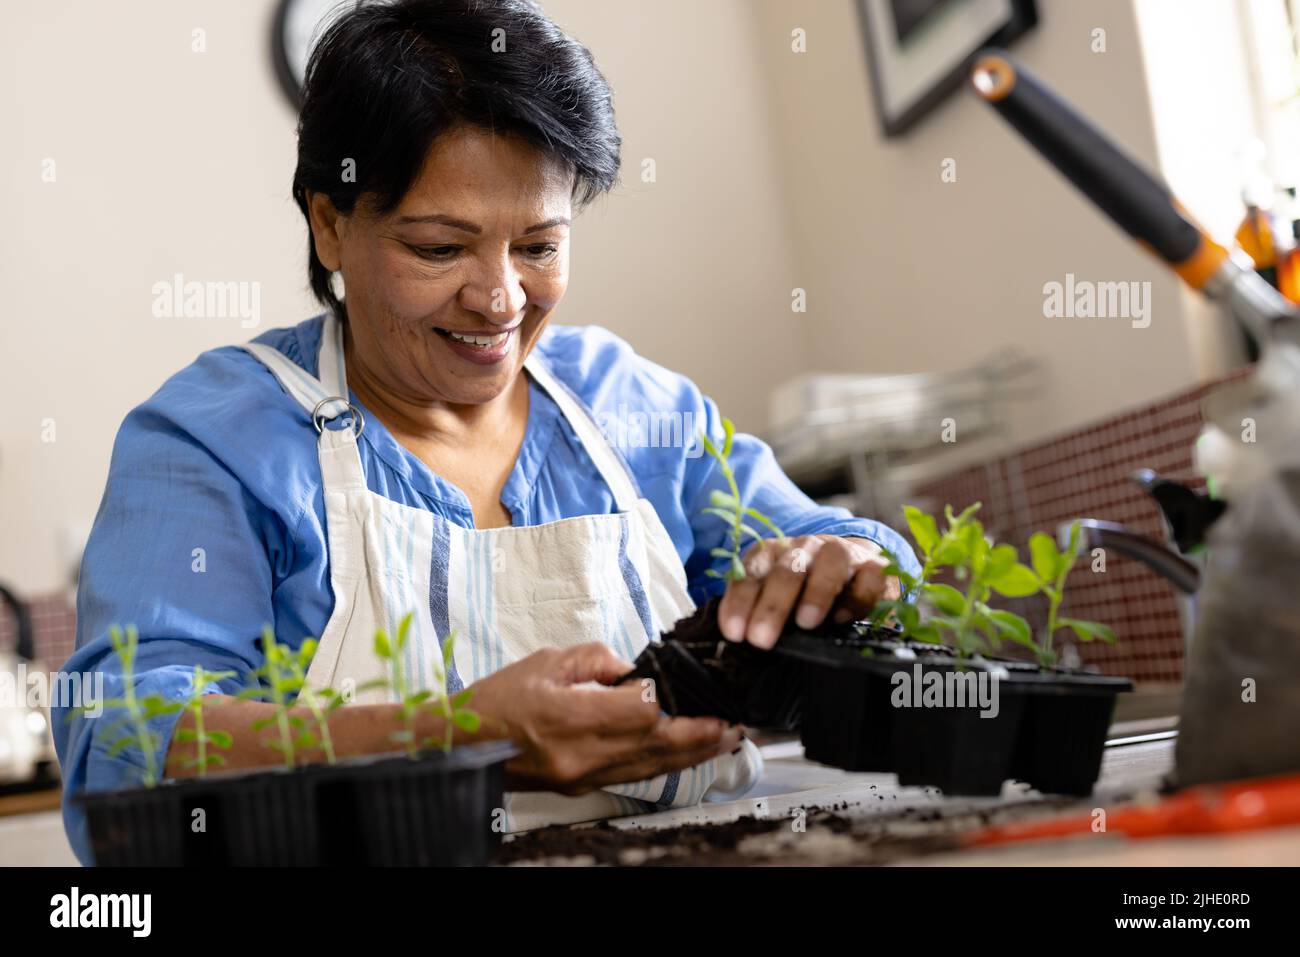 Low angle view of smiling biracial mature woman with short hair planting saplings in seedling tray Stock Photo